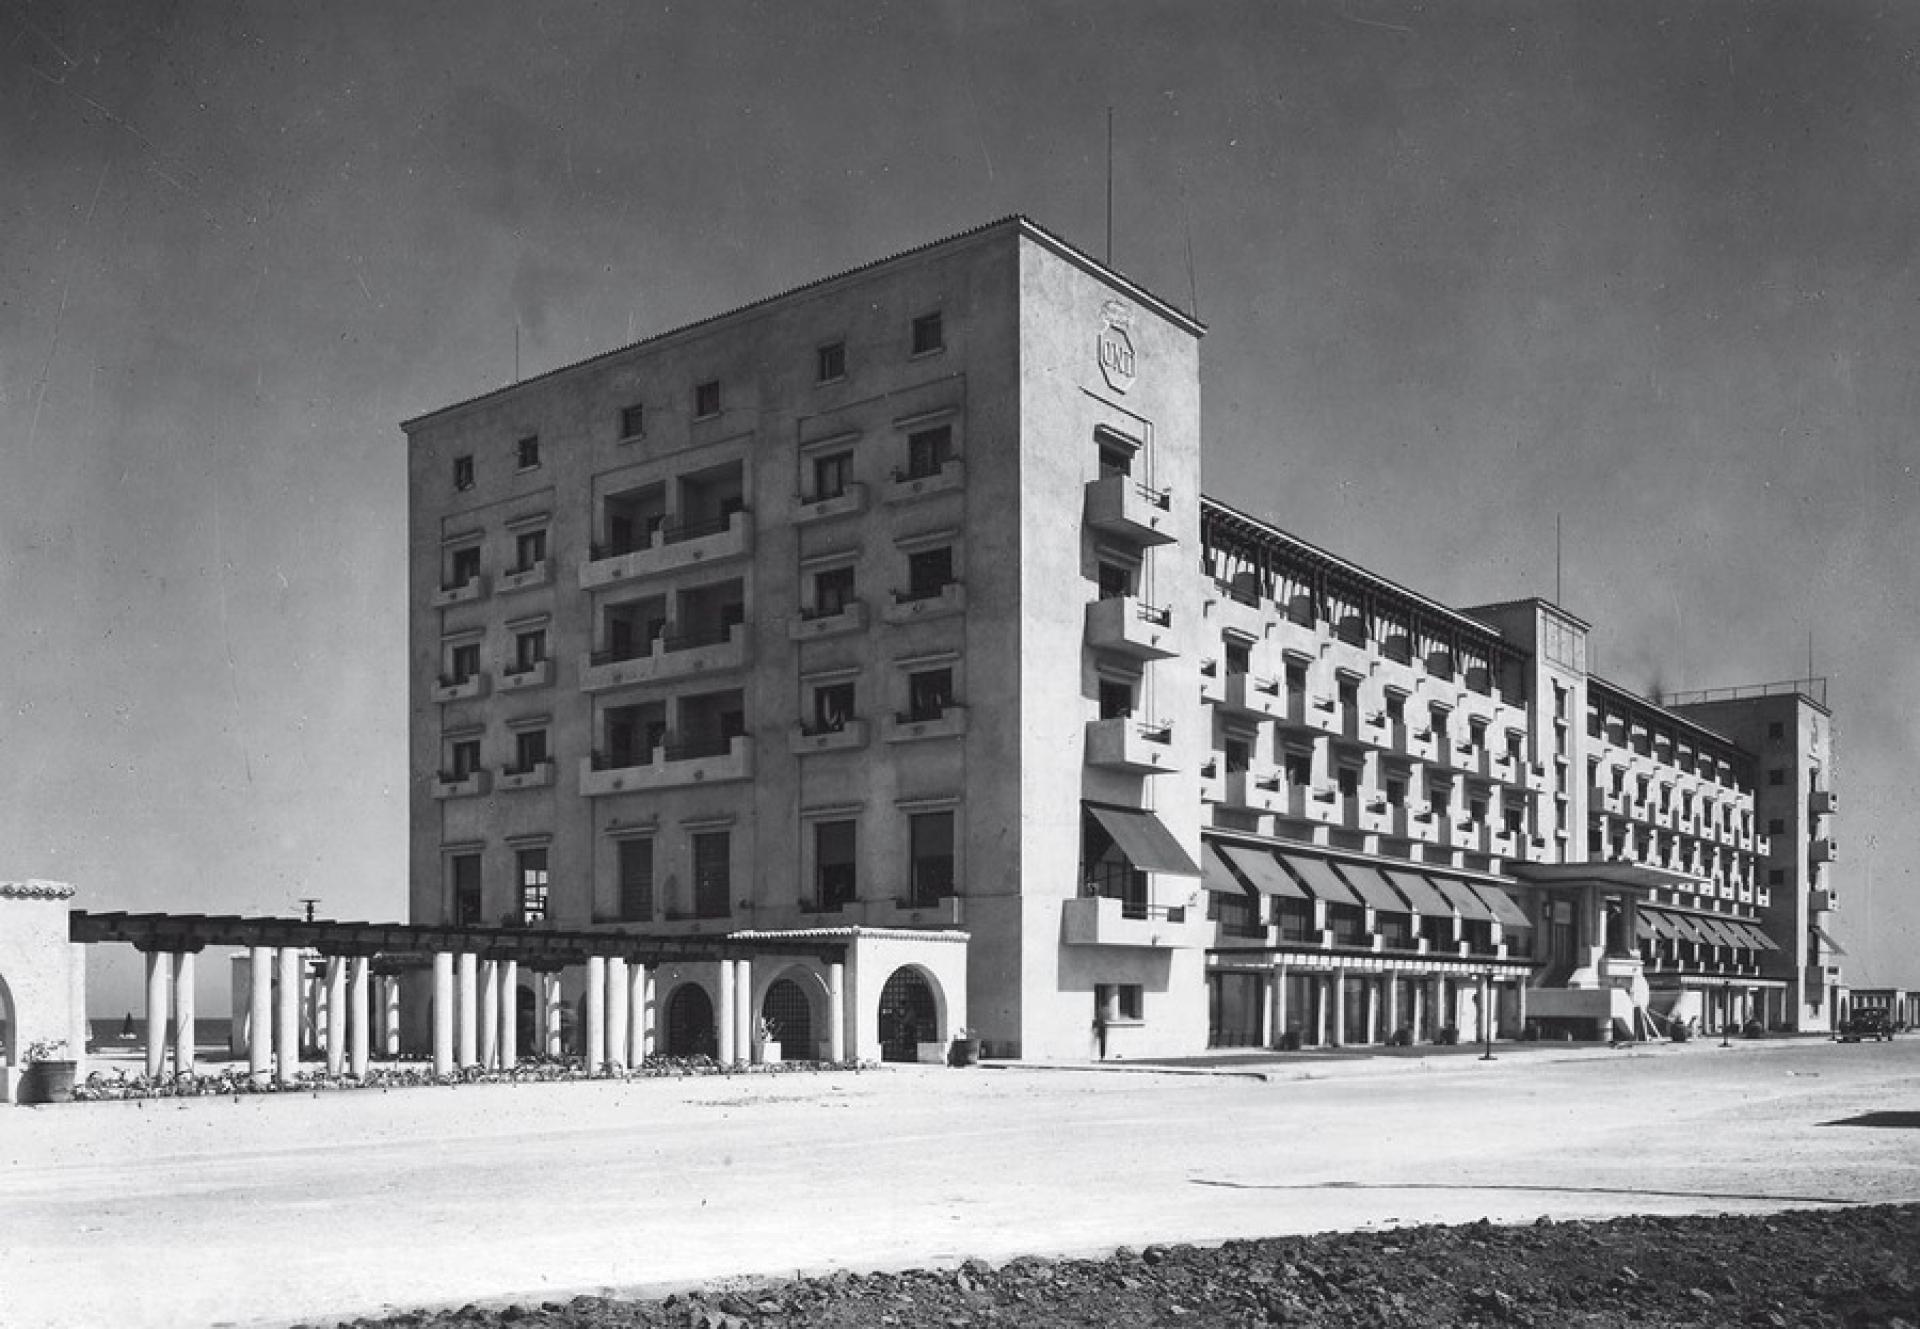 Rex Hotel by George Matei Cantacuzino. | Photo by W. Weiss (Cantacuzino; Paul Marinescu Archive, Bucharest)